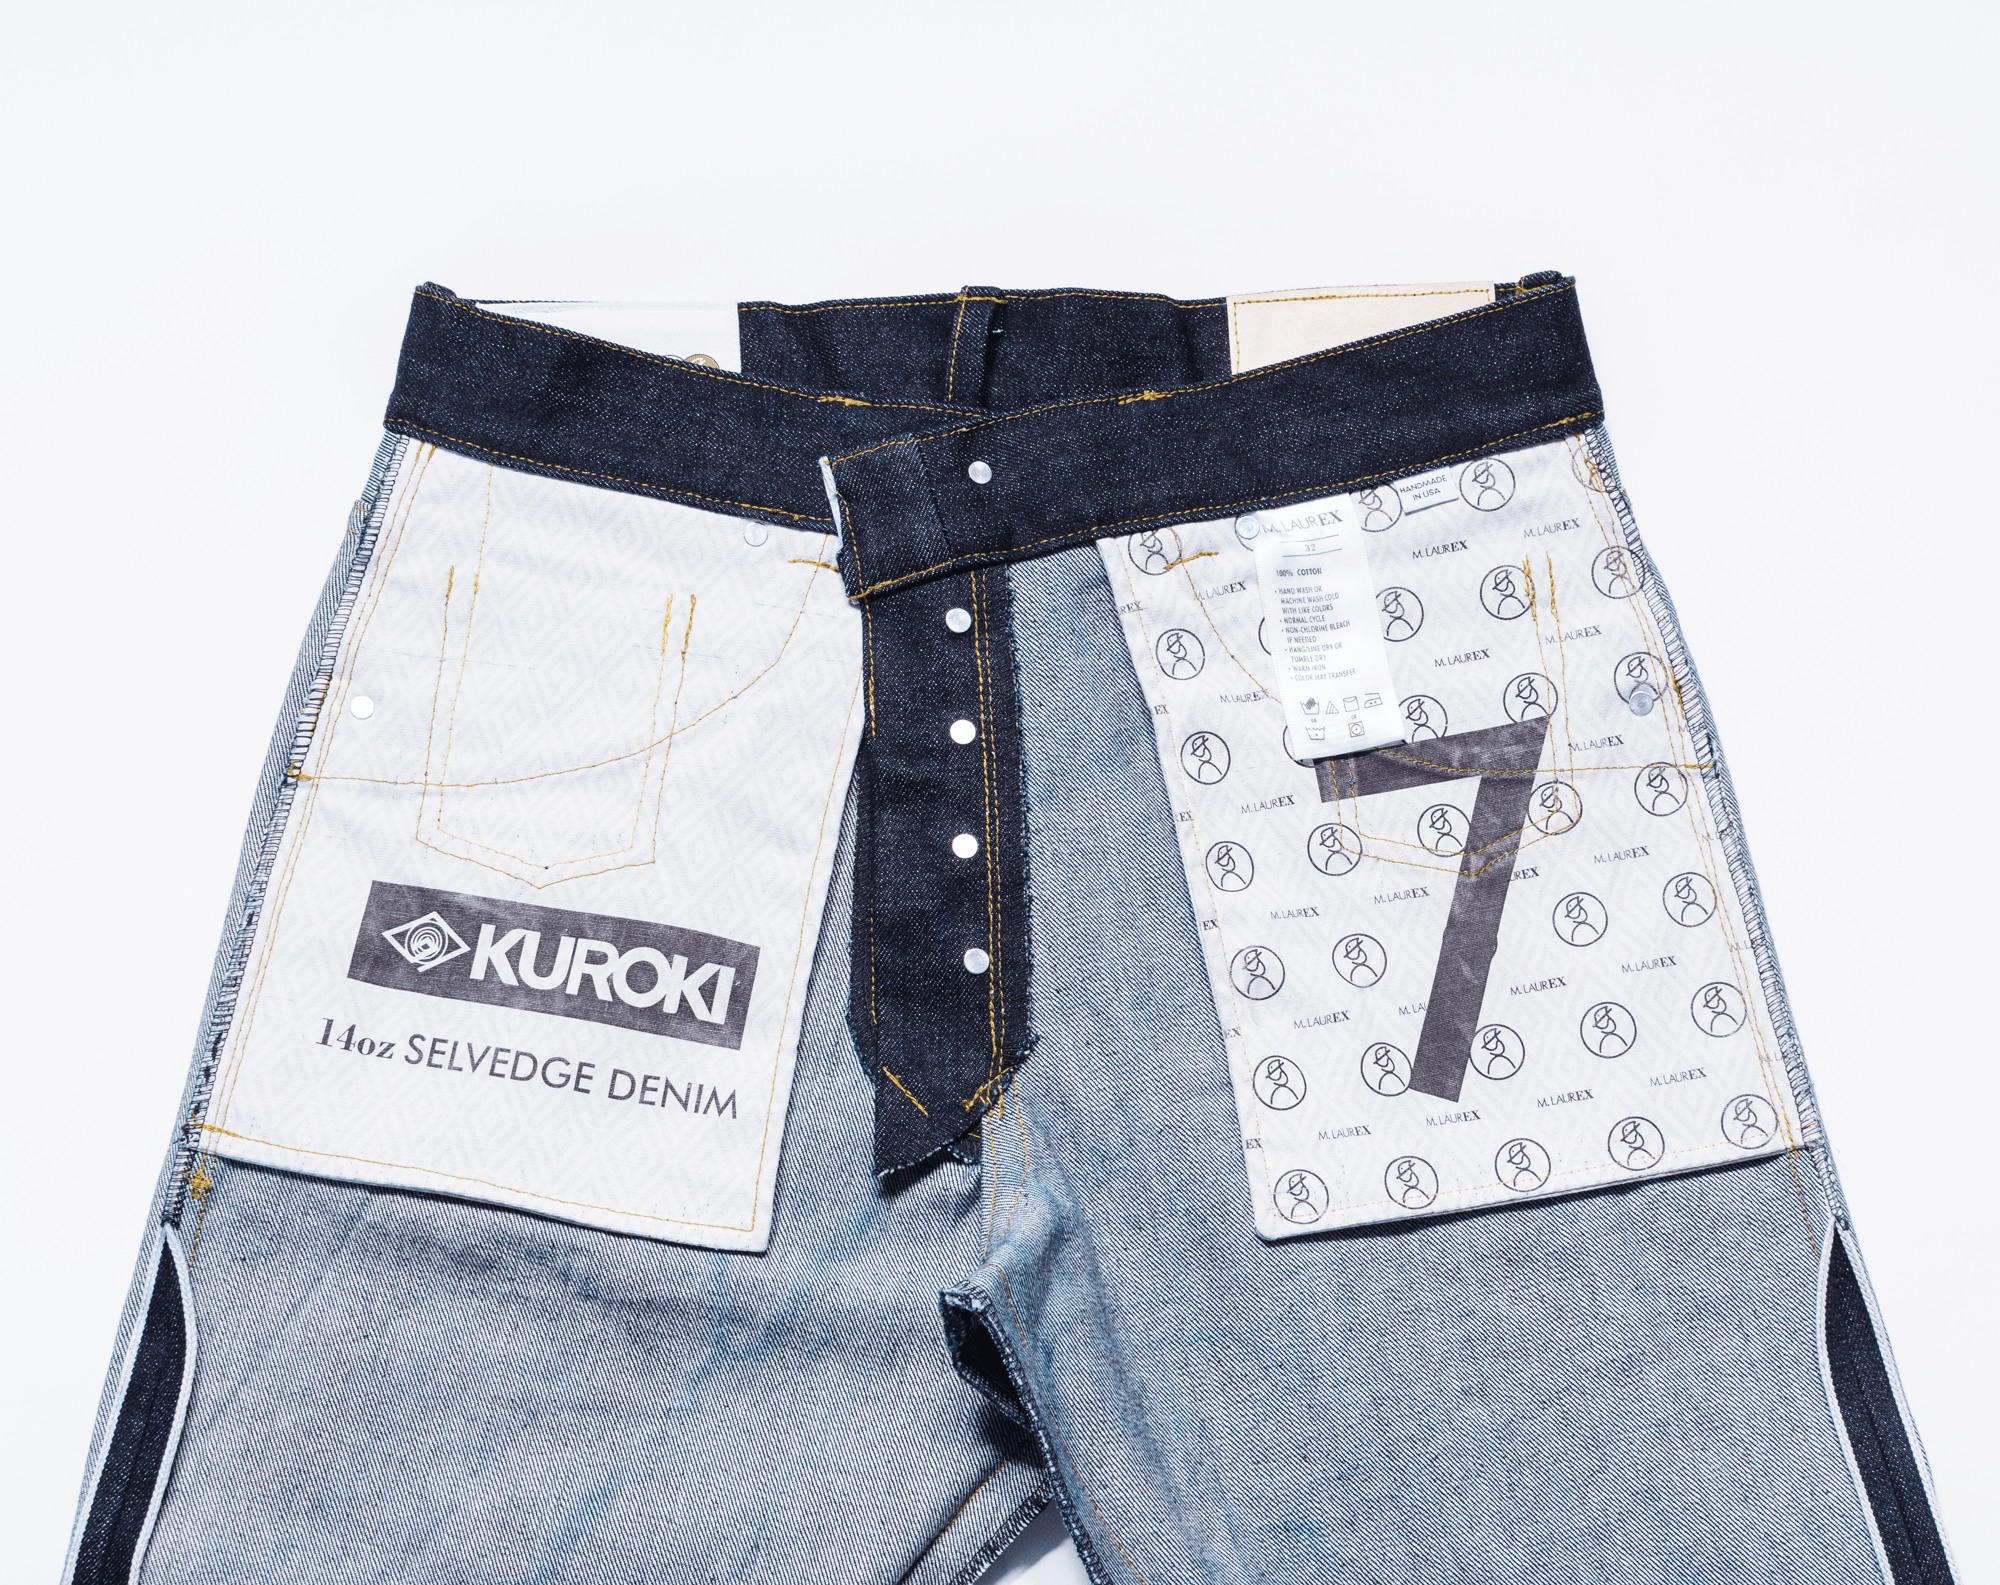 Nudie Jeans Co Gritty Jackson Rubby Selvage Organic cotton 14.6 oz.  Japanese selvage denim from Kuroki Mills All-white selvage ID Tobacc... |  Instagram